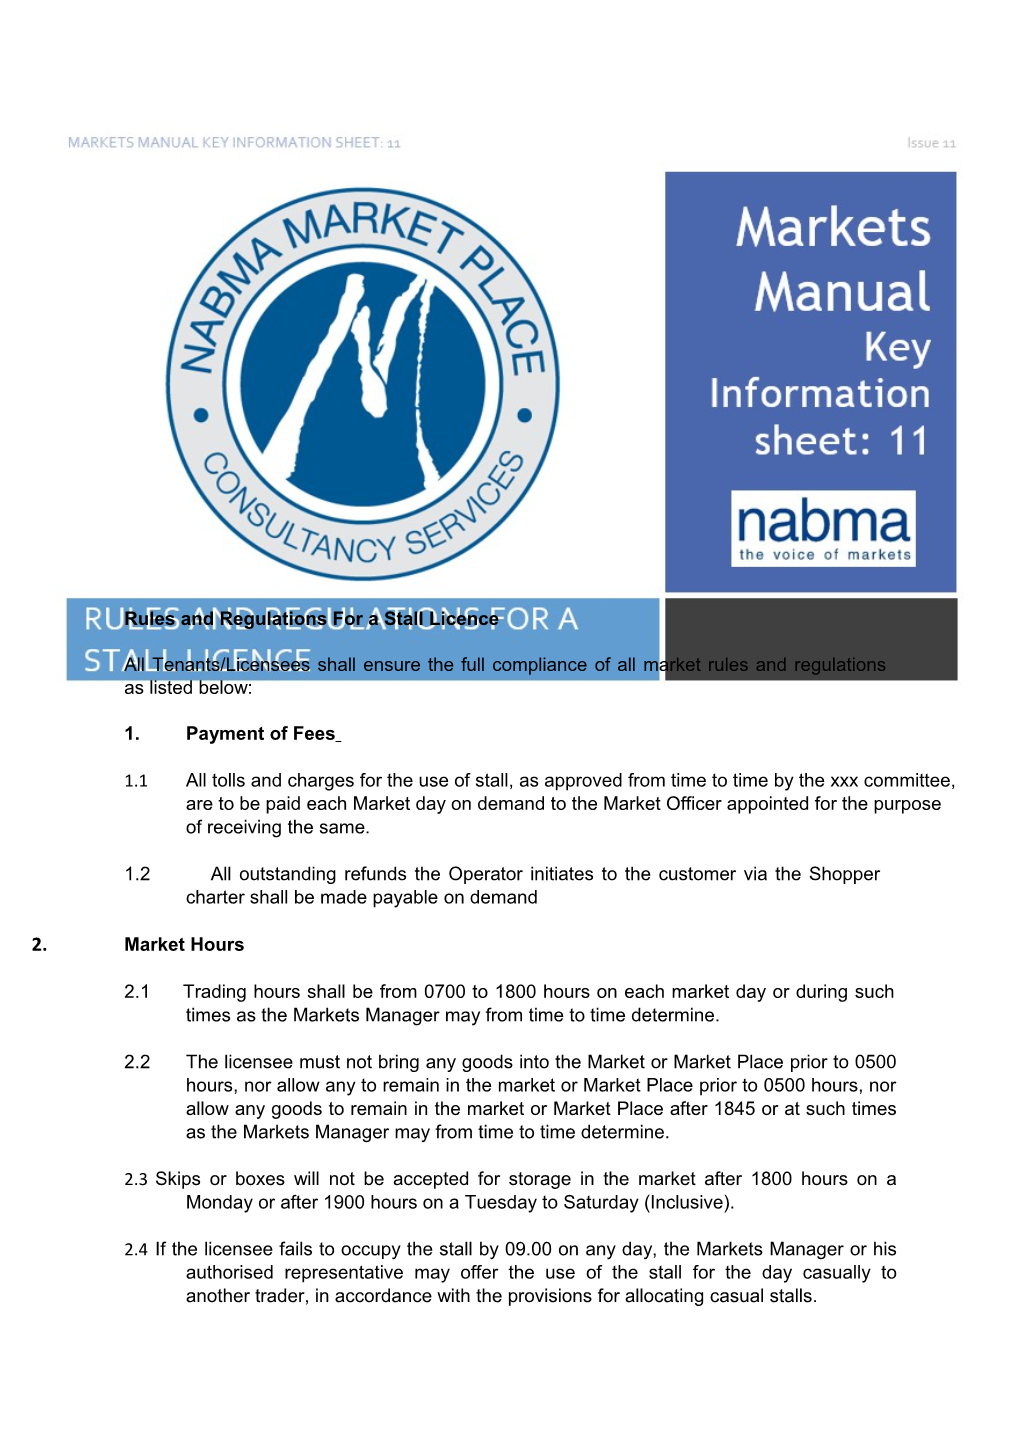 Rules and Regulations for a Stall Licence